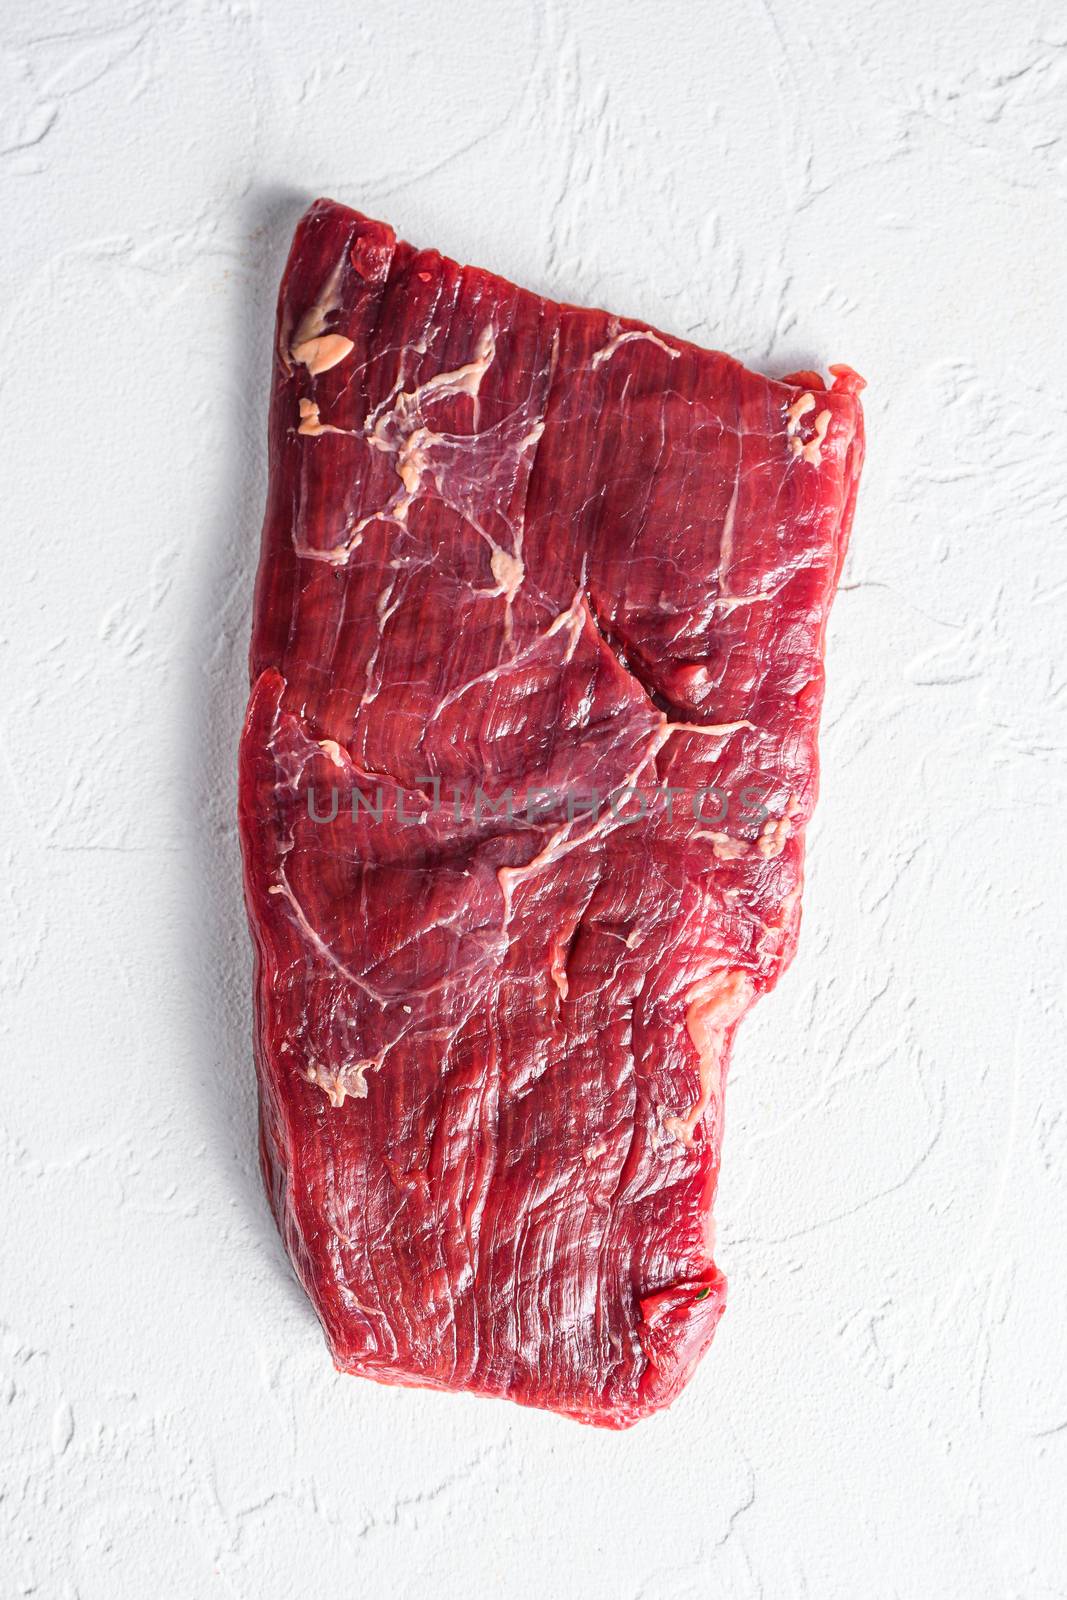 Raw skirt or flank steak,on a white stone background top view vertical.